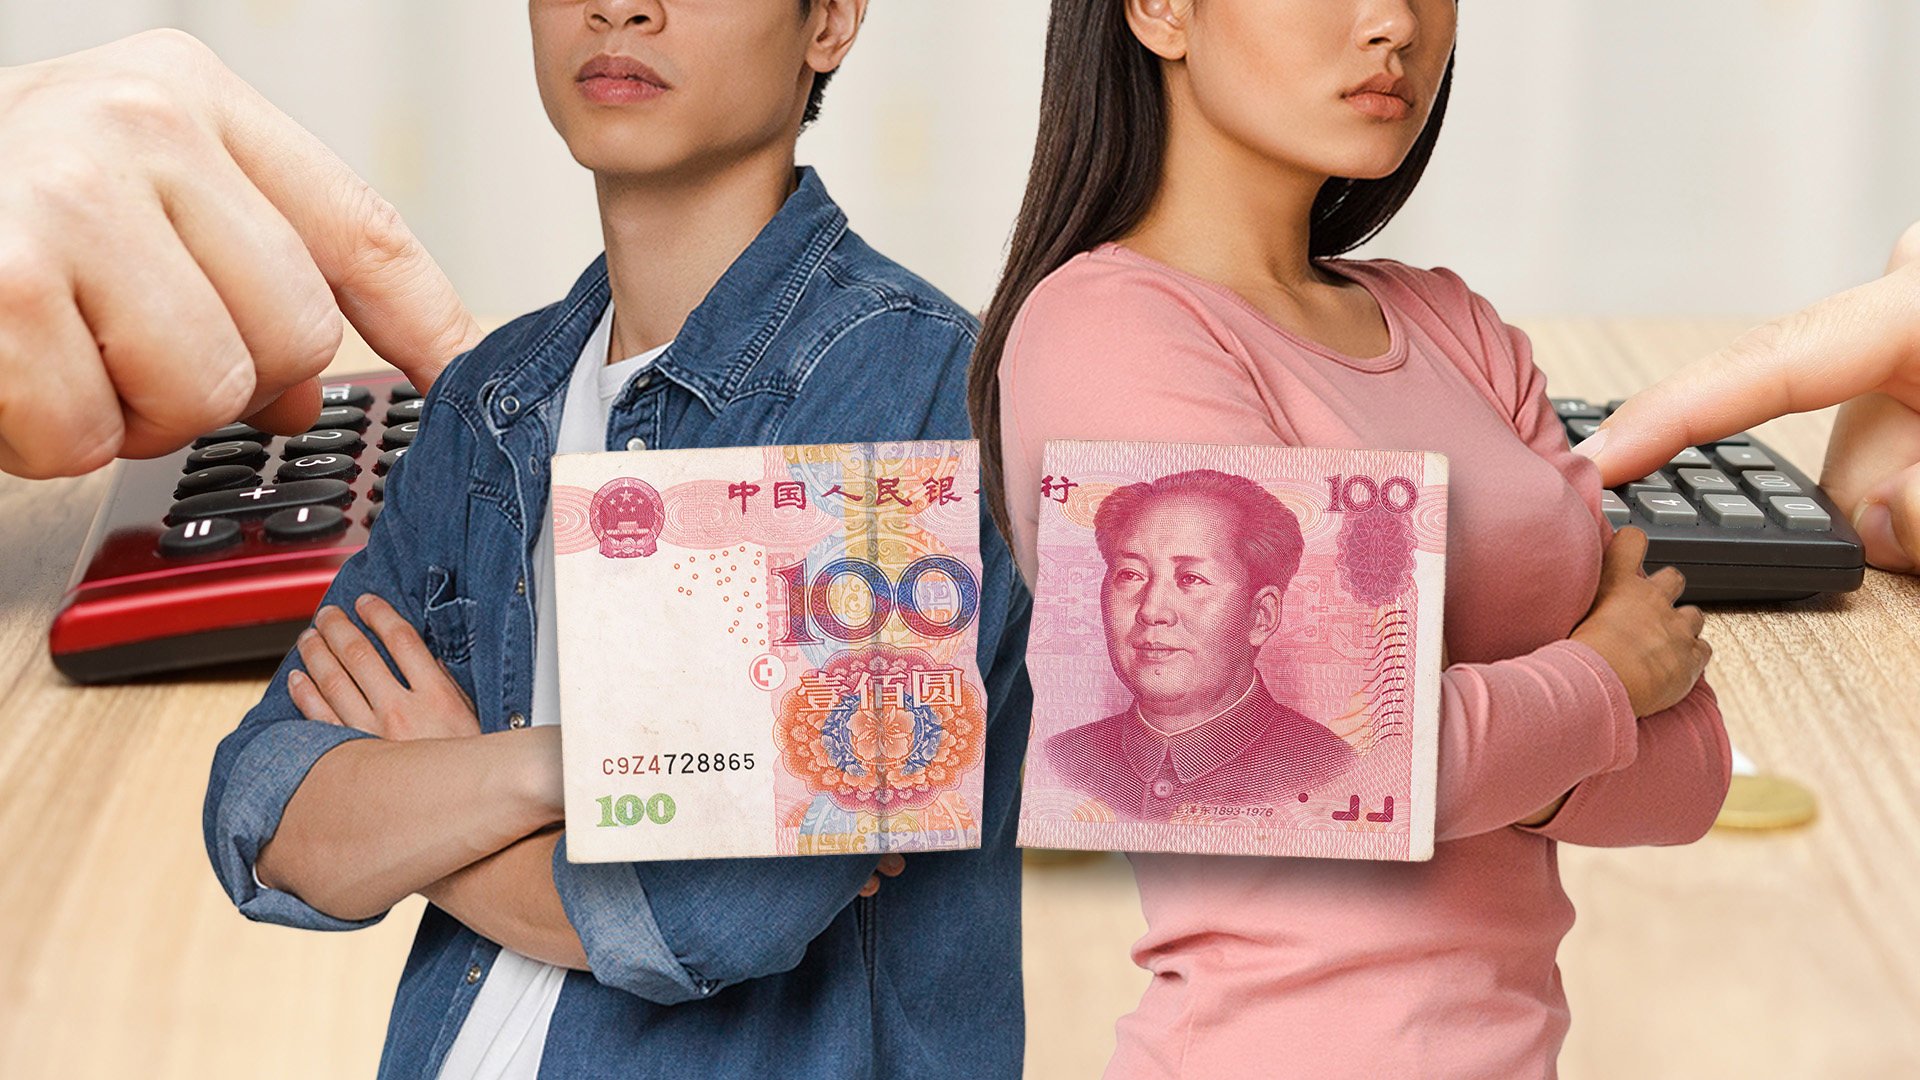 A married couple in China who agreed to split all their living expenses down the middle 18 years ago have ended up on opposite sides in an acrimonious court battle. Photo: SCMP composite/Shutterstock